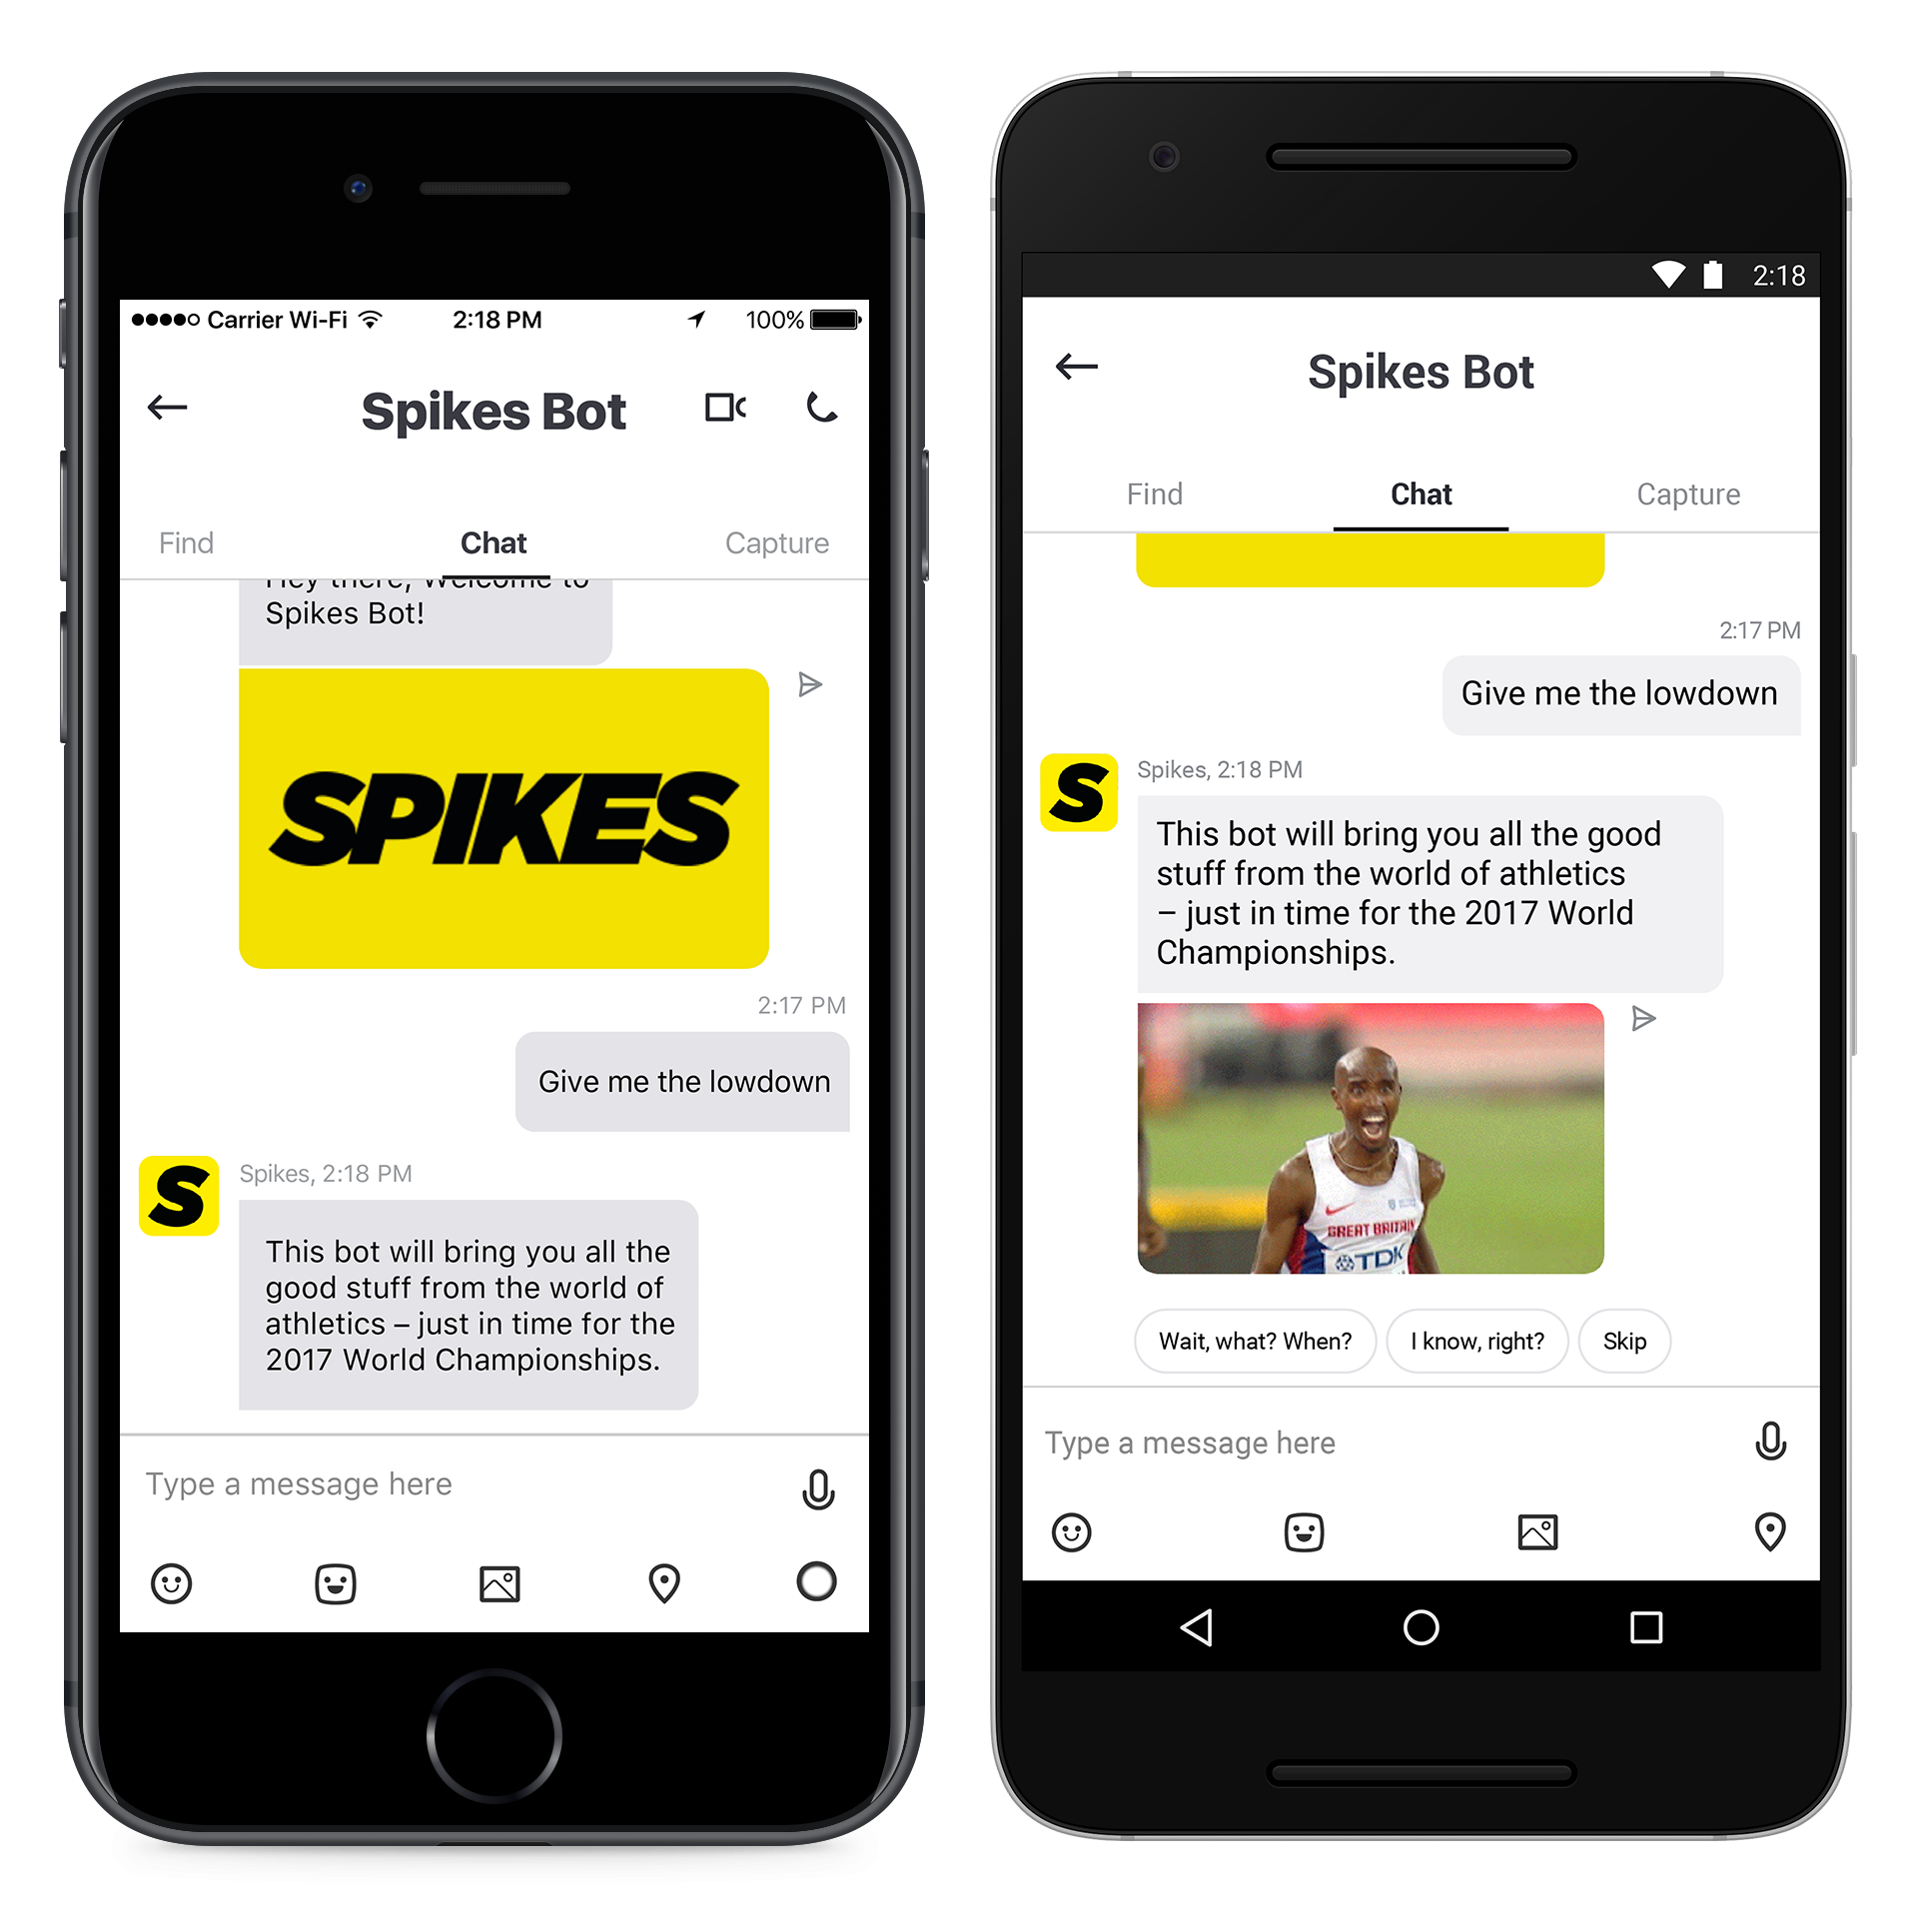 A new "Spikes Bot" has been introduced before the IAAF World Championships ©IAAF/Spikes Bot